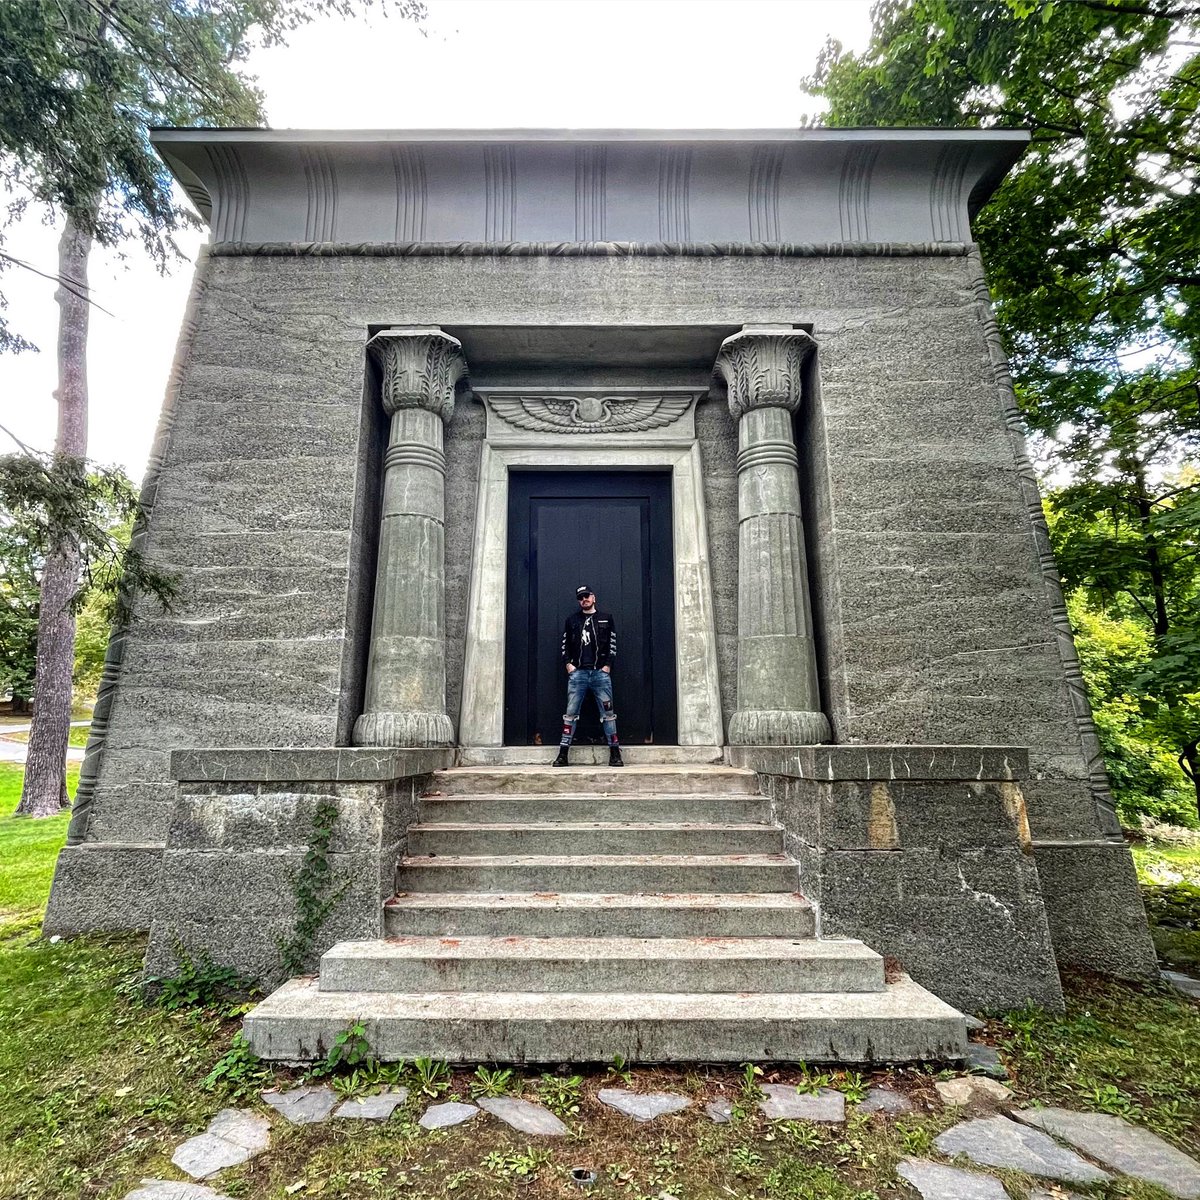 In front of the “Sphinx Tomb” on Dartmouth college campus. A mysterious initiation chamber of a secret society. No one knows what goes on inside. But it’s definitely for weird and powerful elite rich kids to make them even more elite and powerful. #ivyleague #occultism